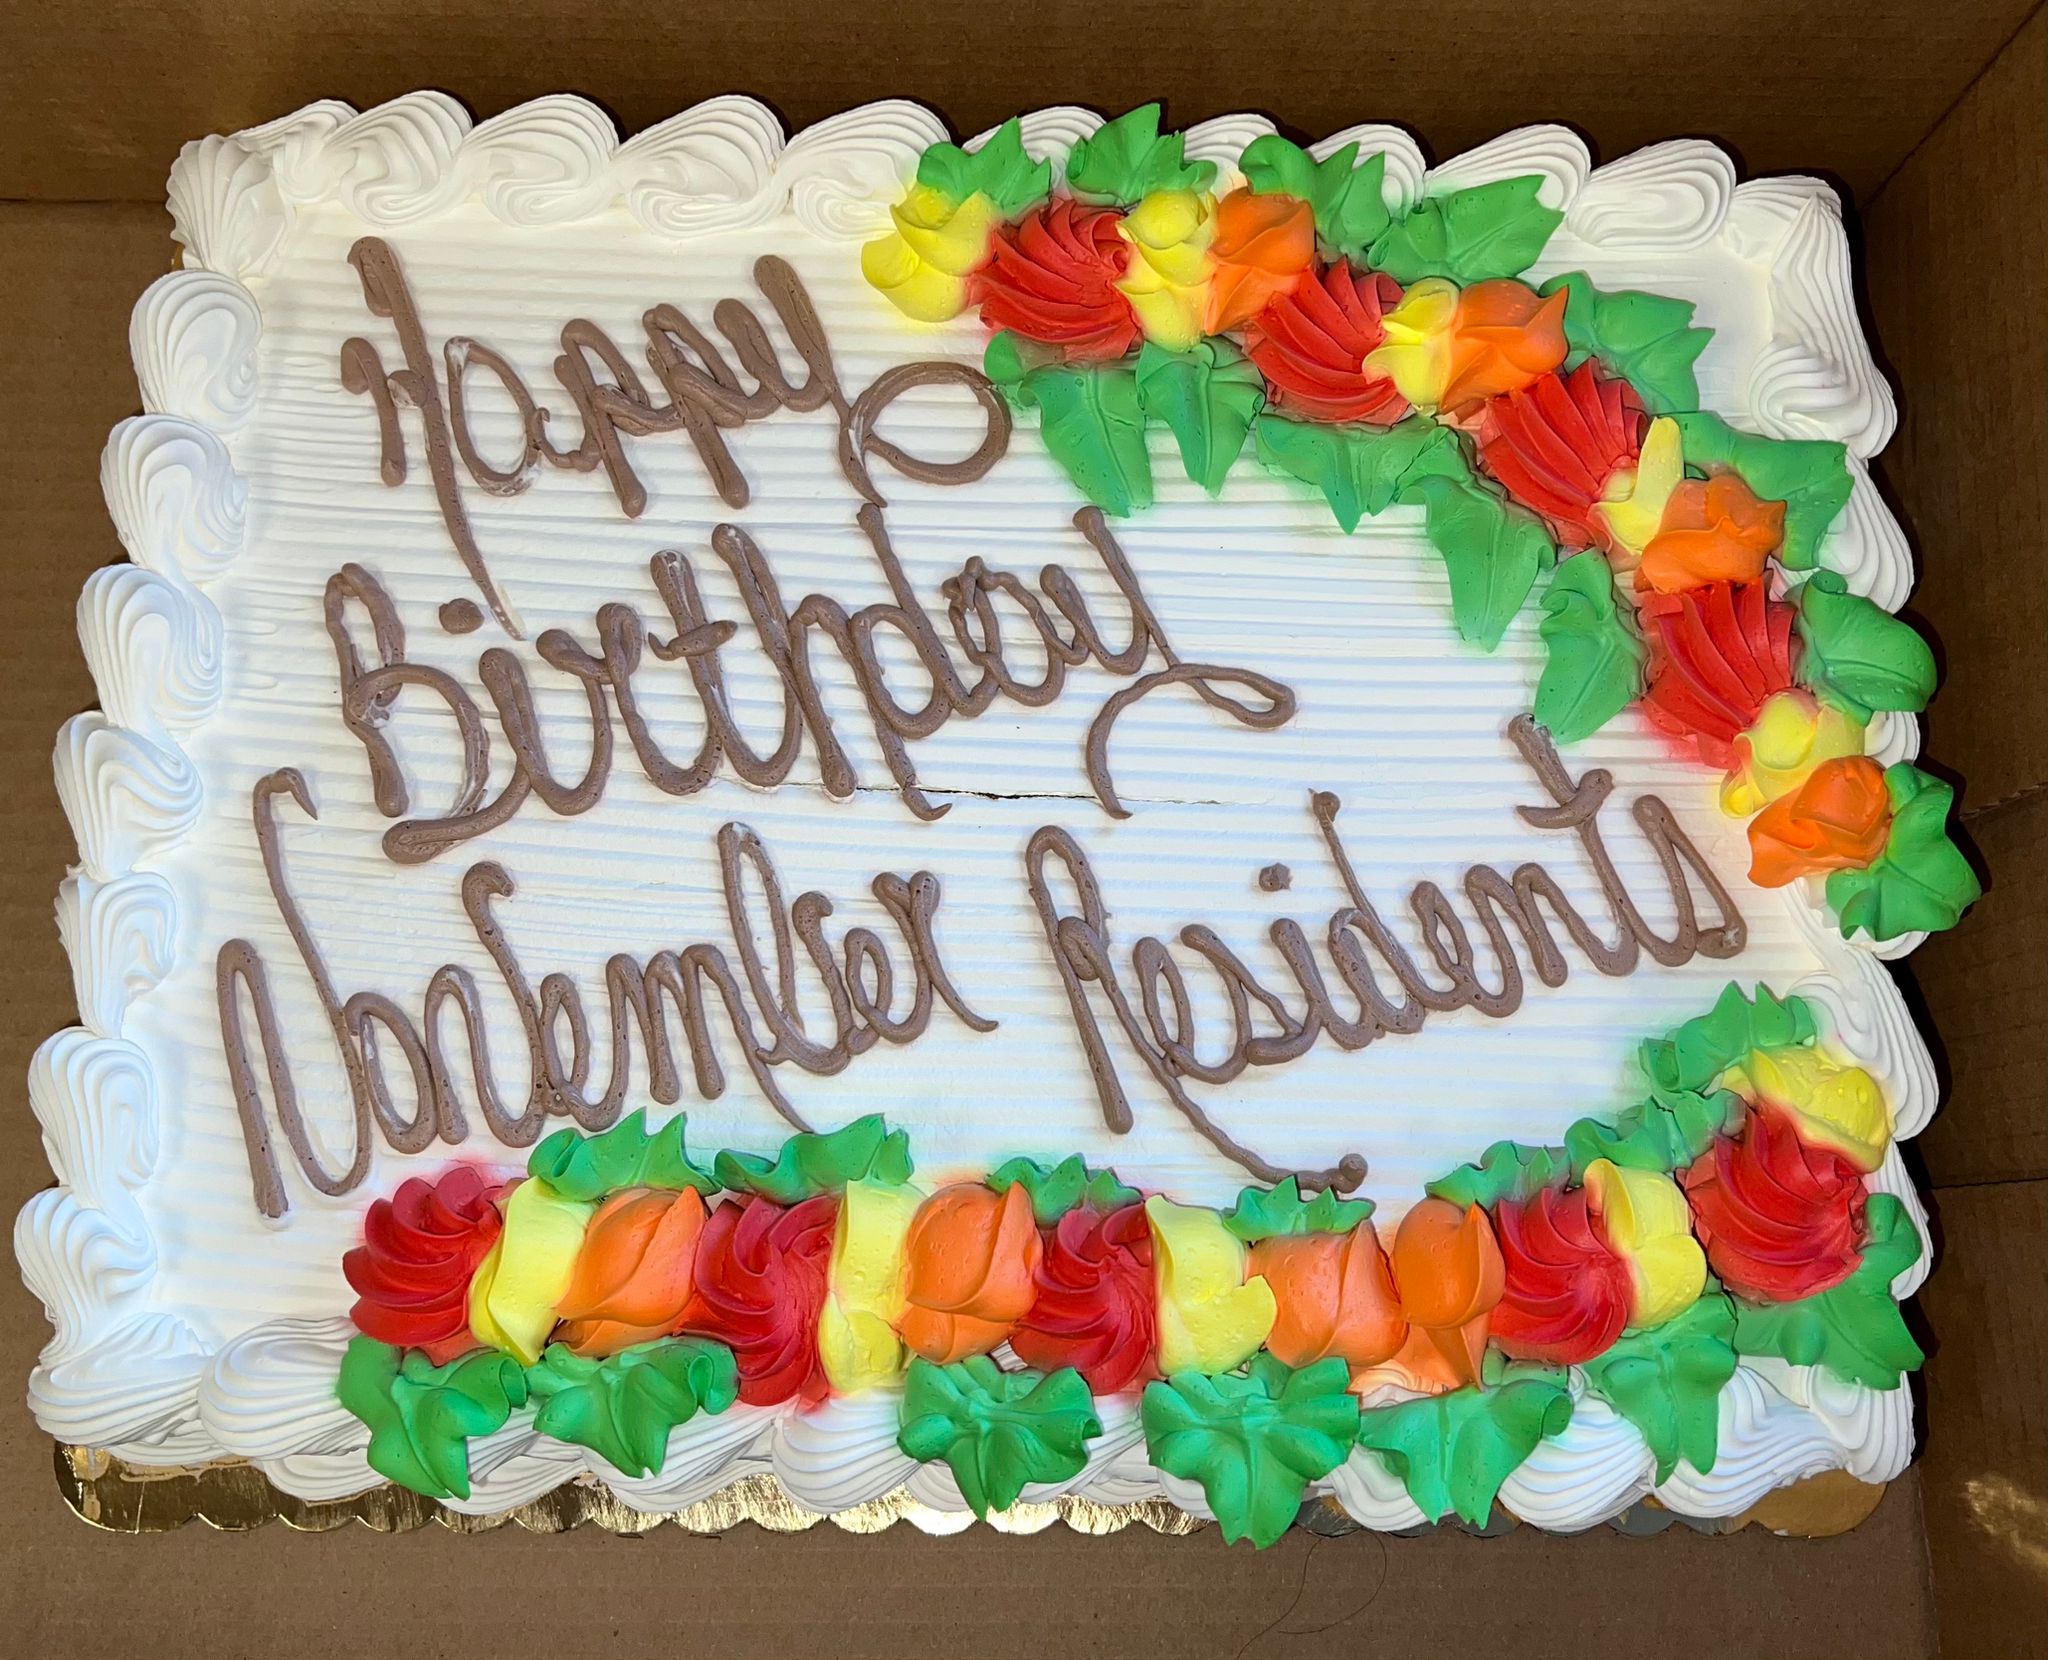 Happy Birthday to Our November Residents